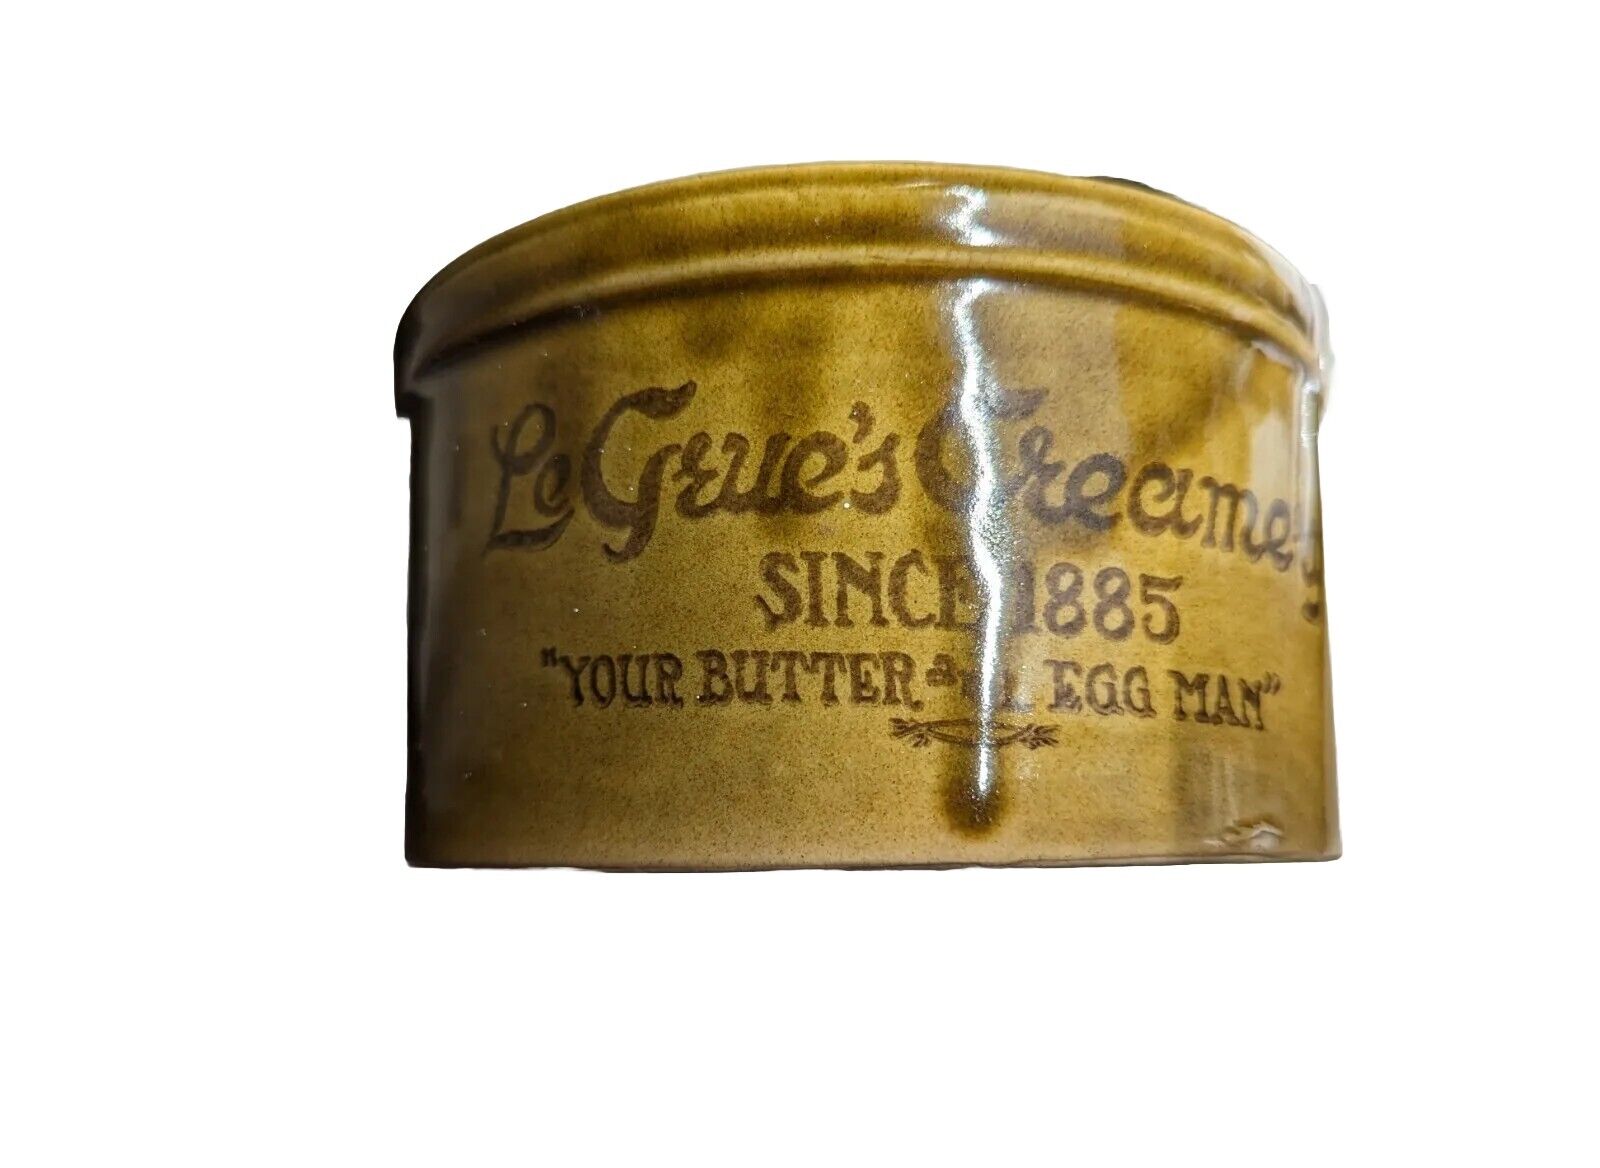 Le Grue\'s Creamery Stoneware Crock Since 1885 Your Butter And Egg Man Vintage